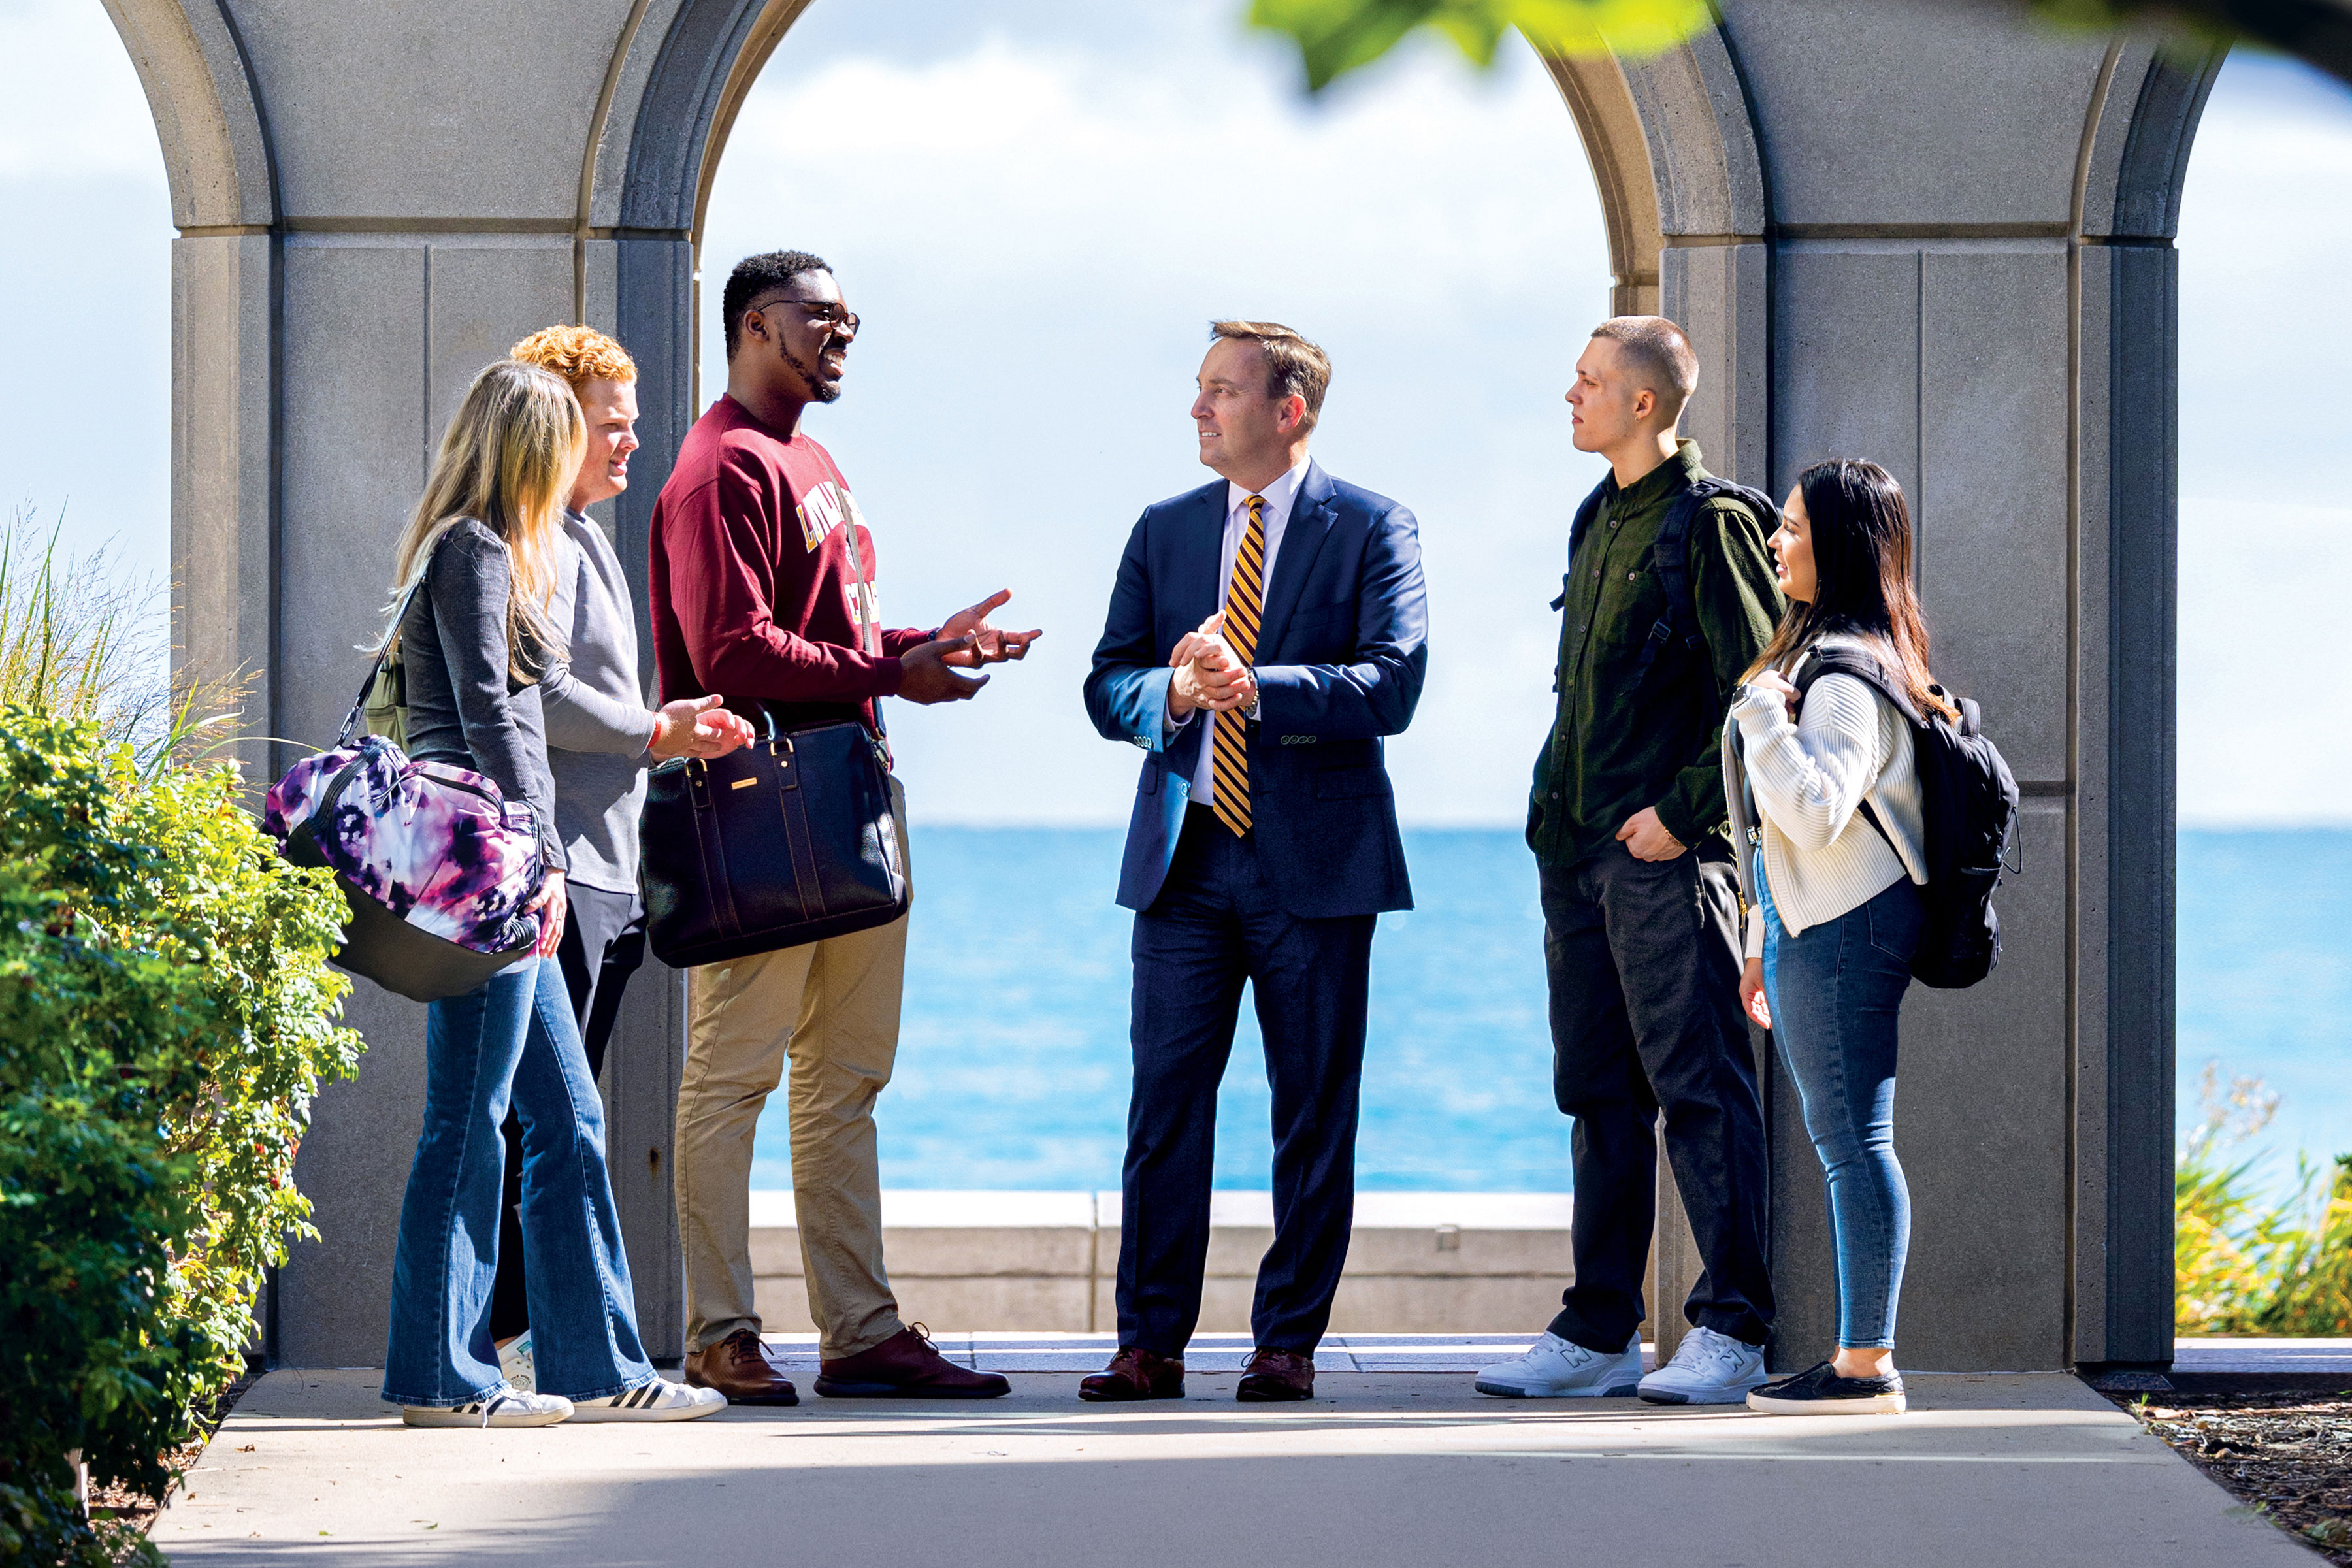 Loyola president Mark C. Reed talks with five students in front of Lake Michigan